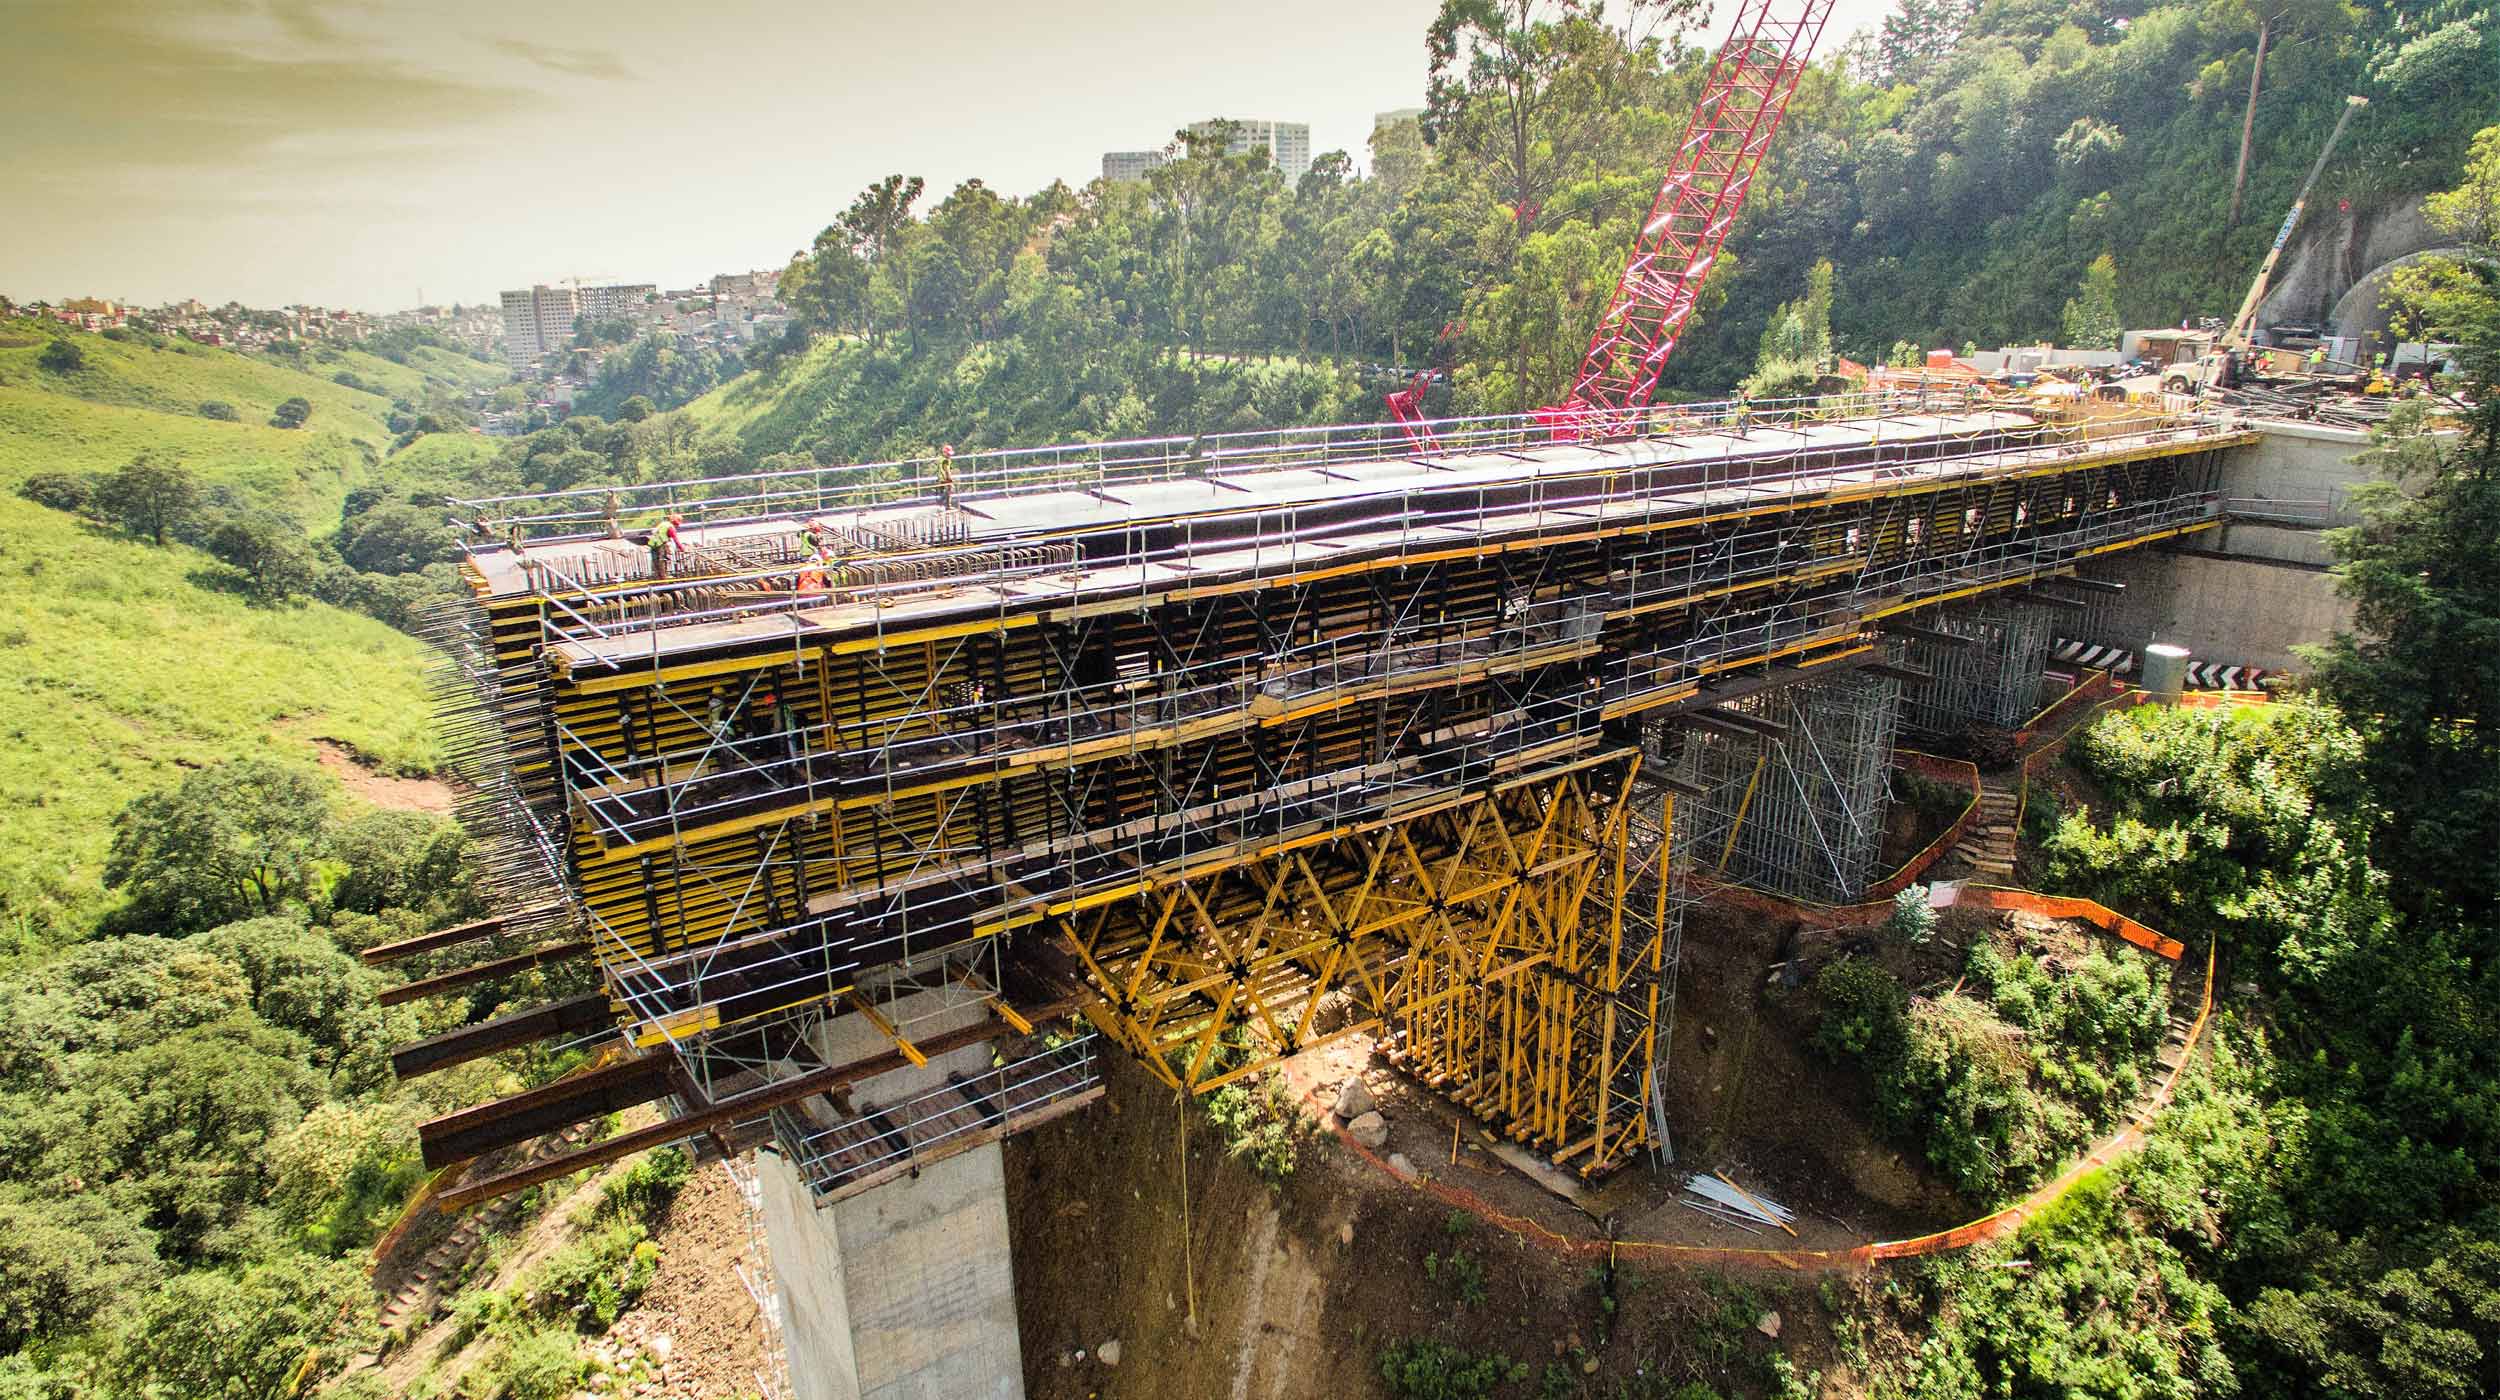 ULMA offers a wide range of bridge formwork solutions for the construction of highways, bypass roads, access ramps, arch bridges etc. Specify ULMA forming solutions for bridge construction projects